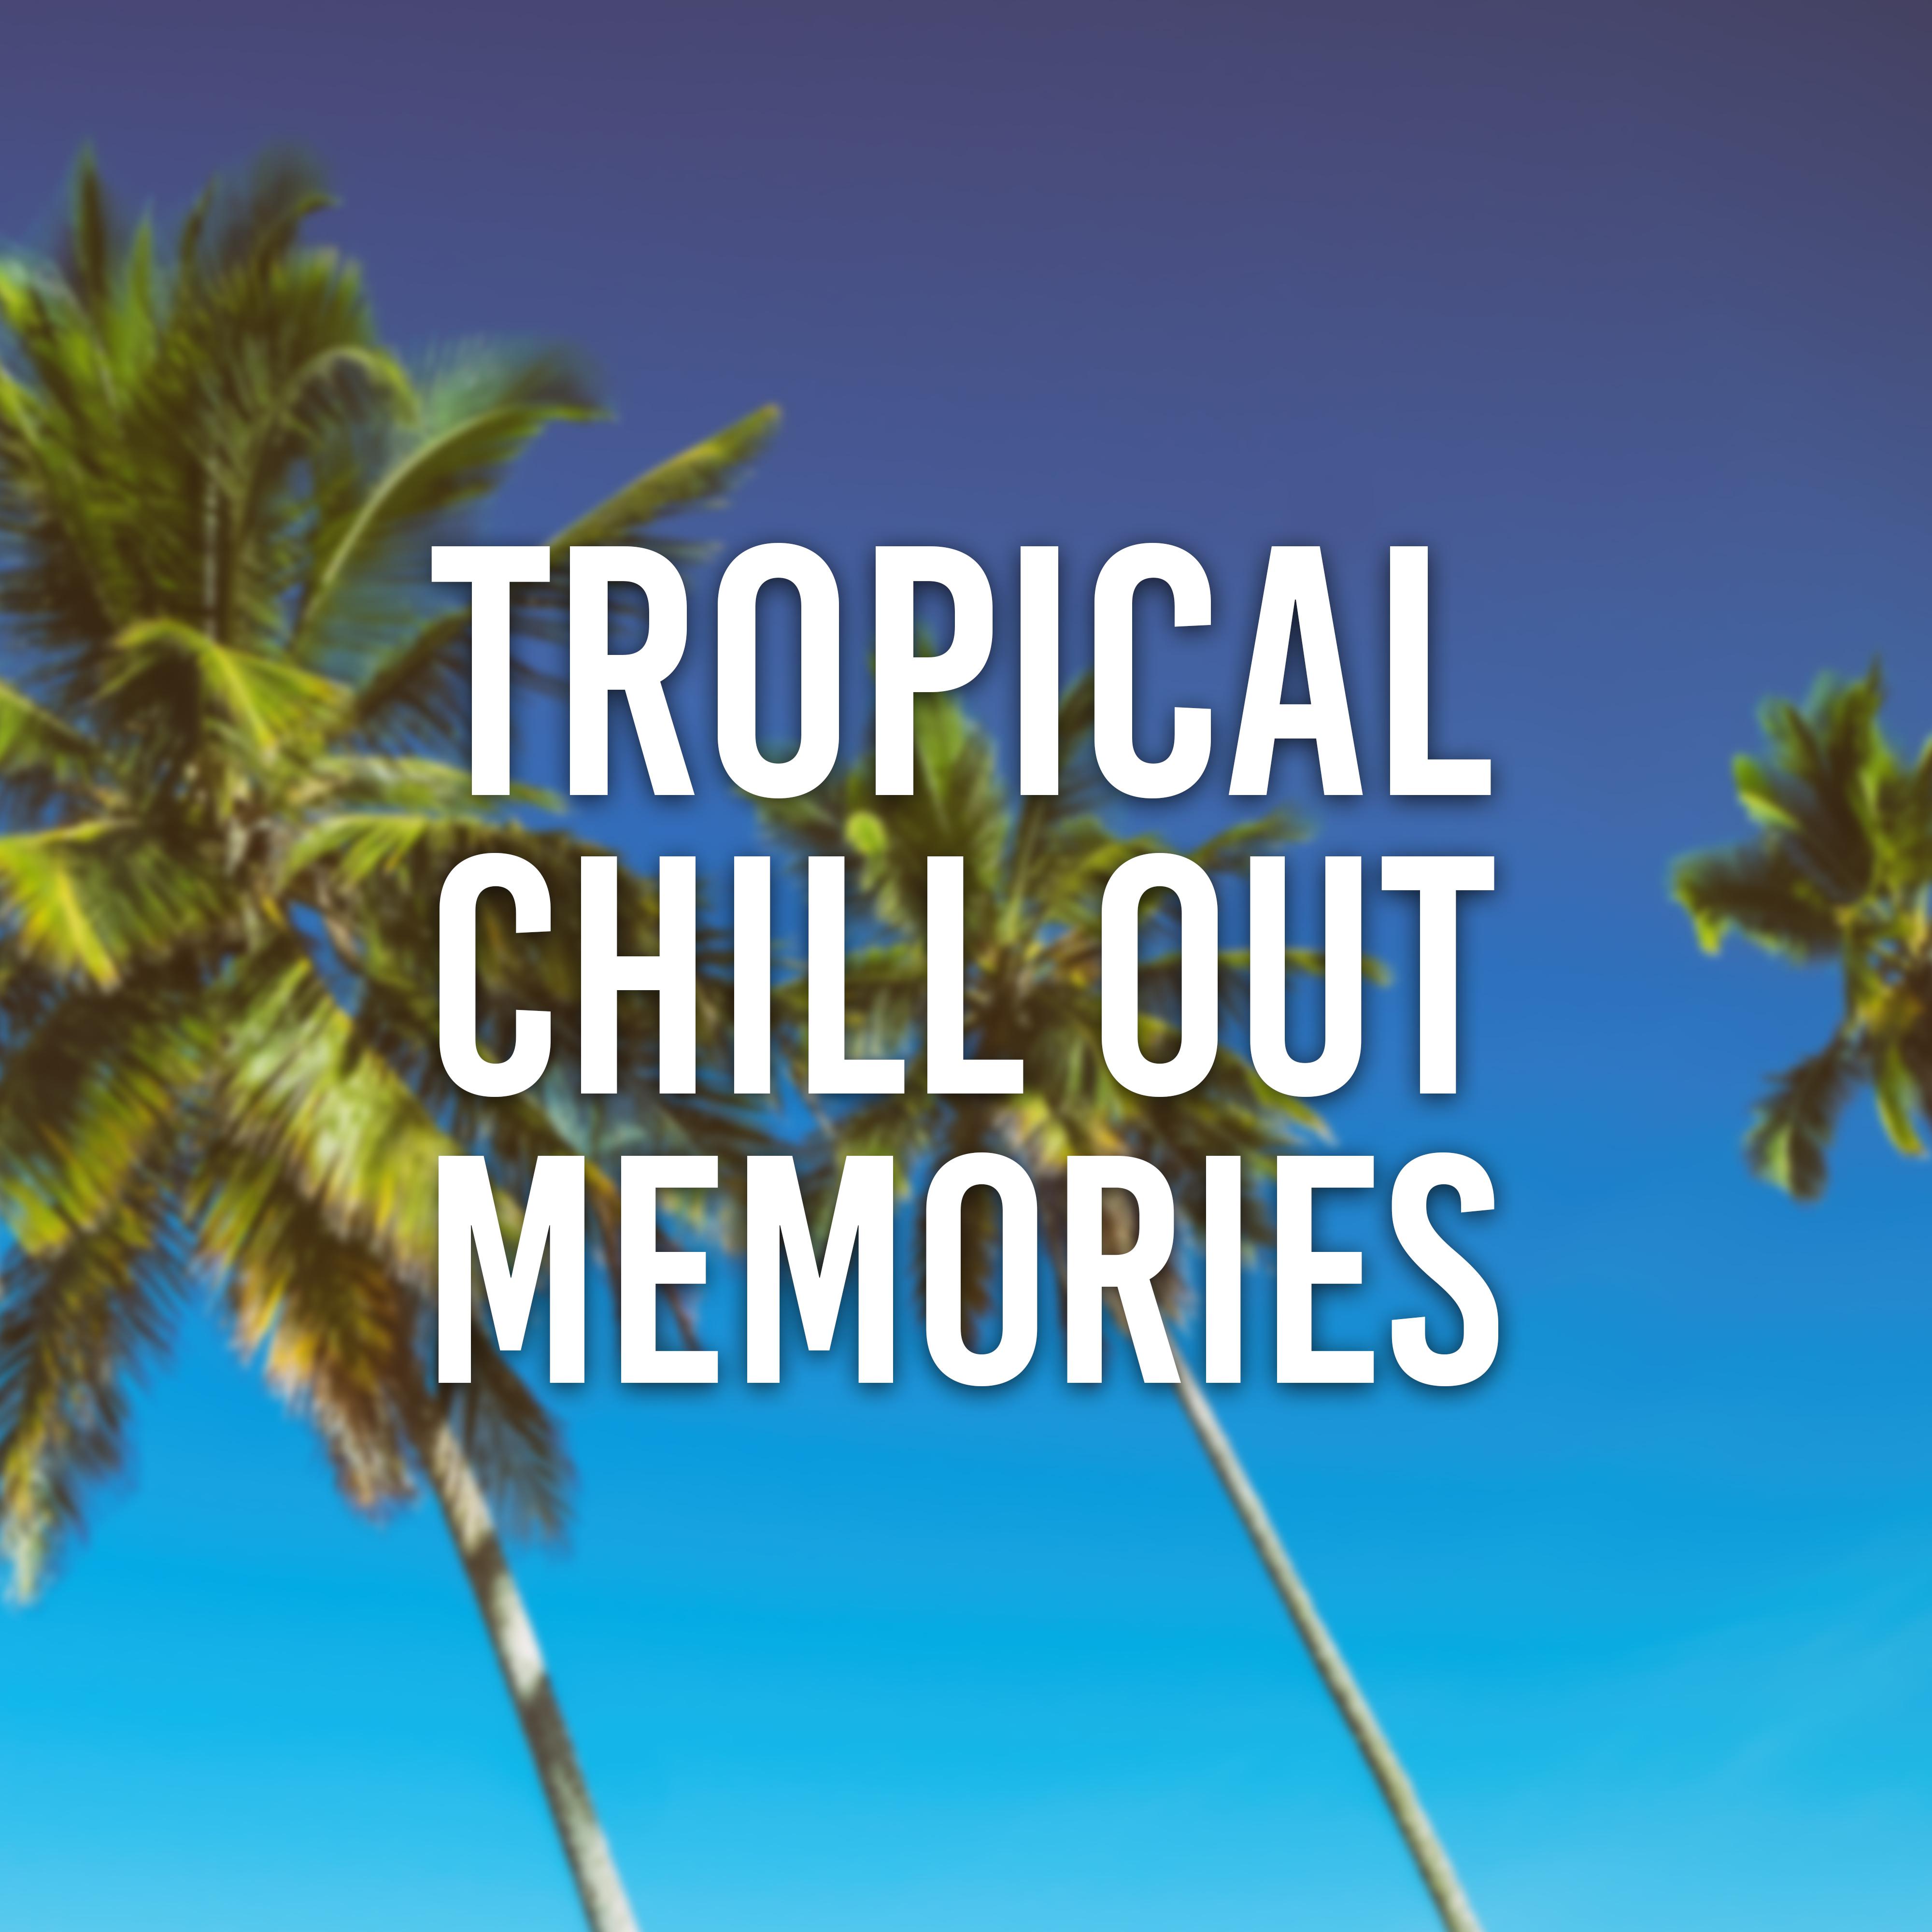 Tropical Chill Out Memories